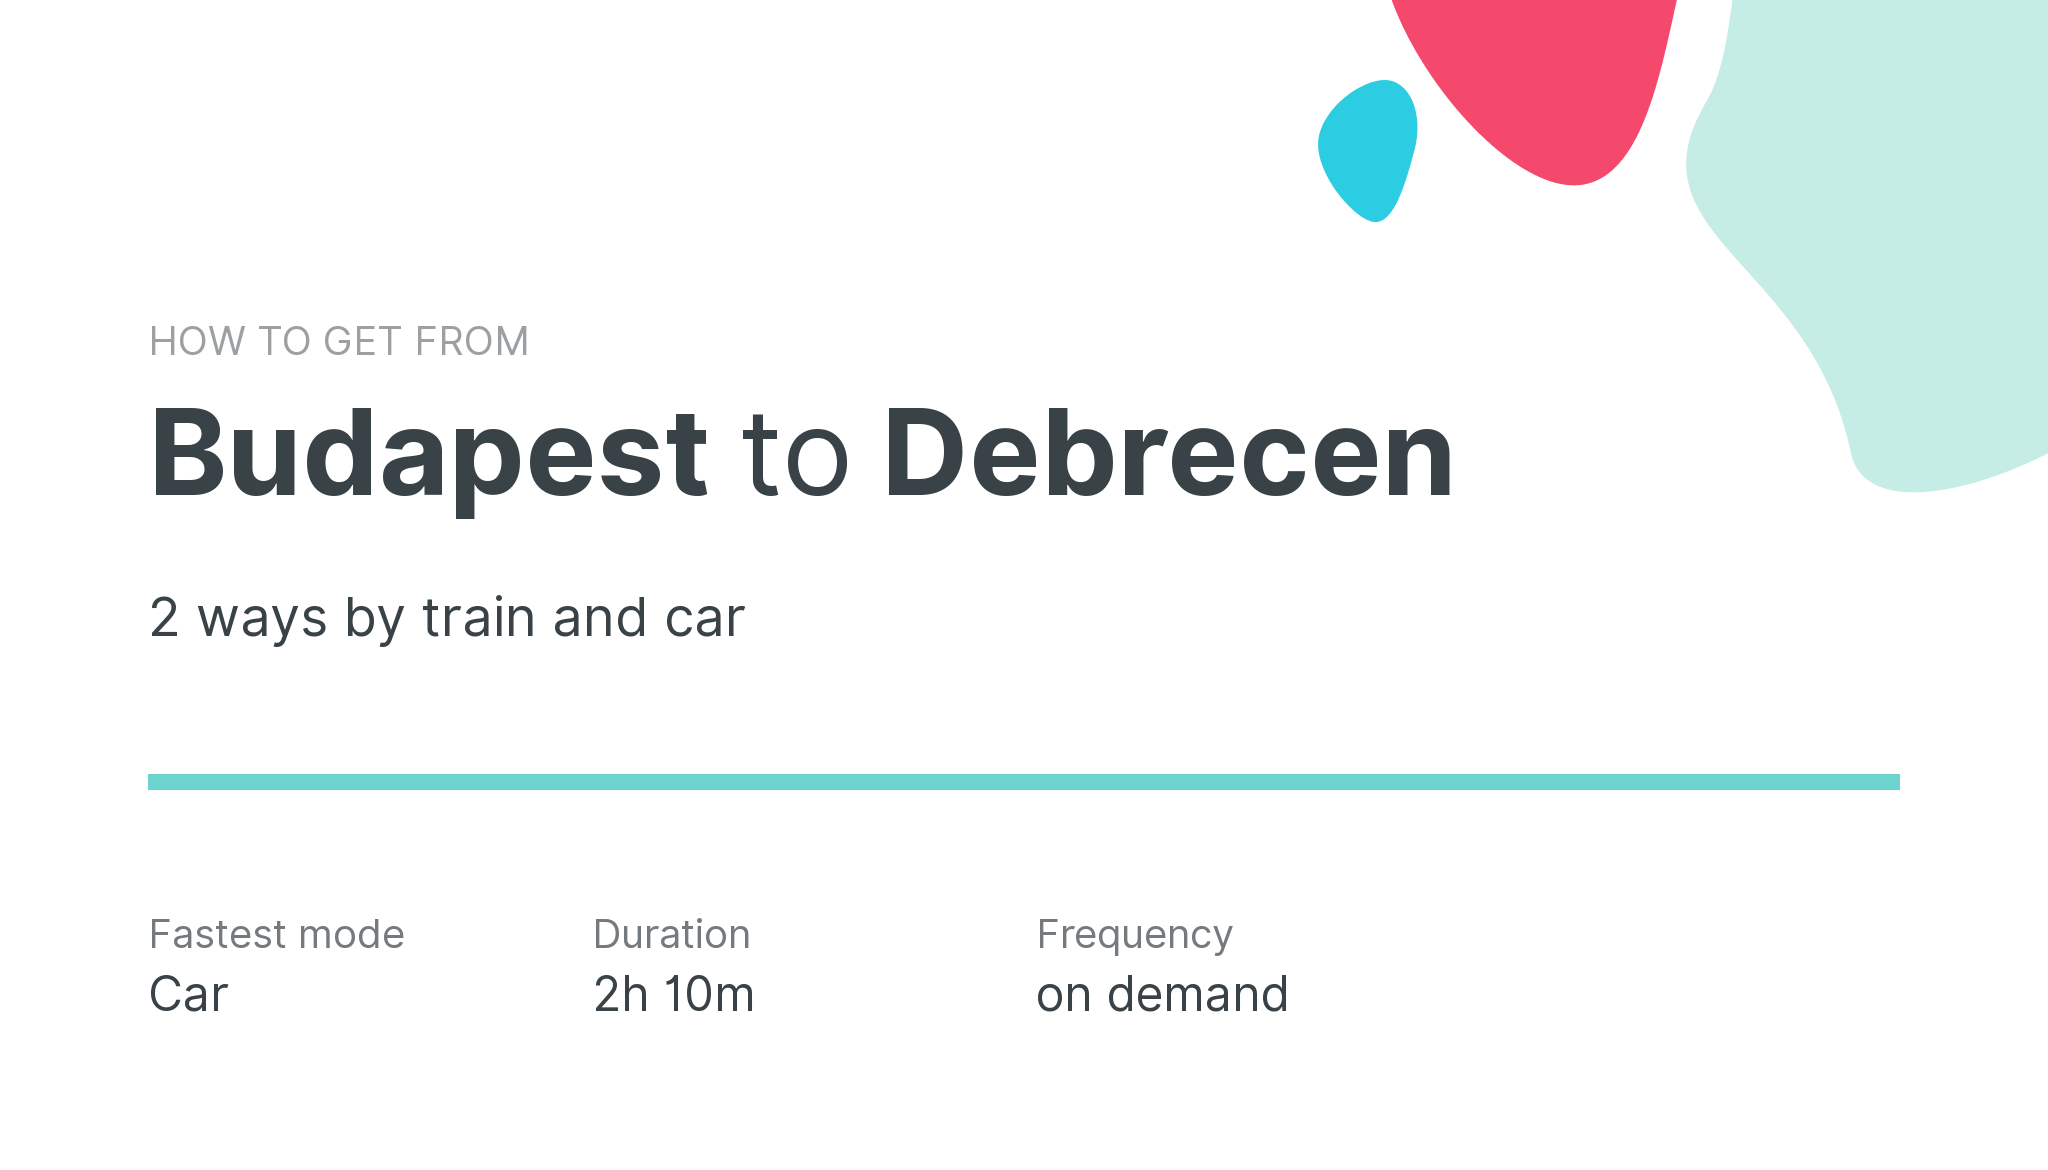 How do I get from Budapest to Debrecen